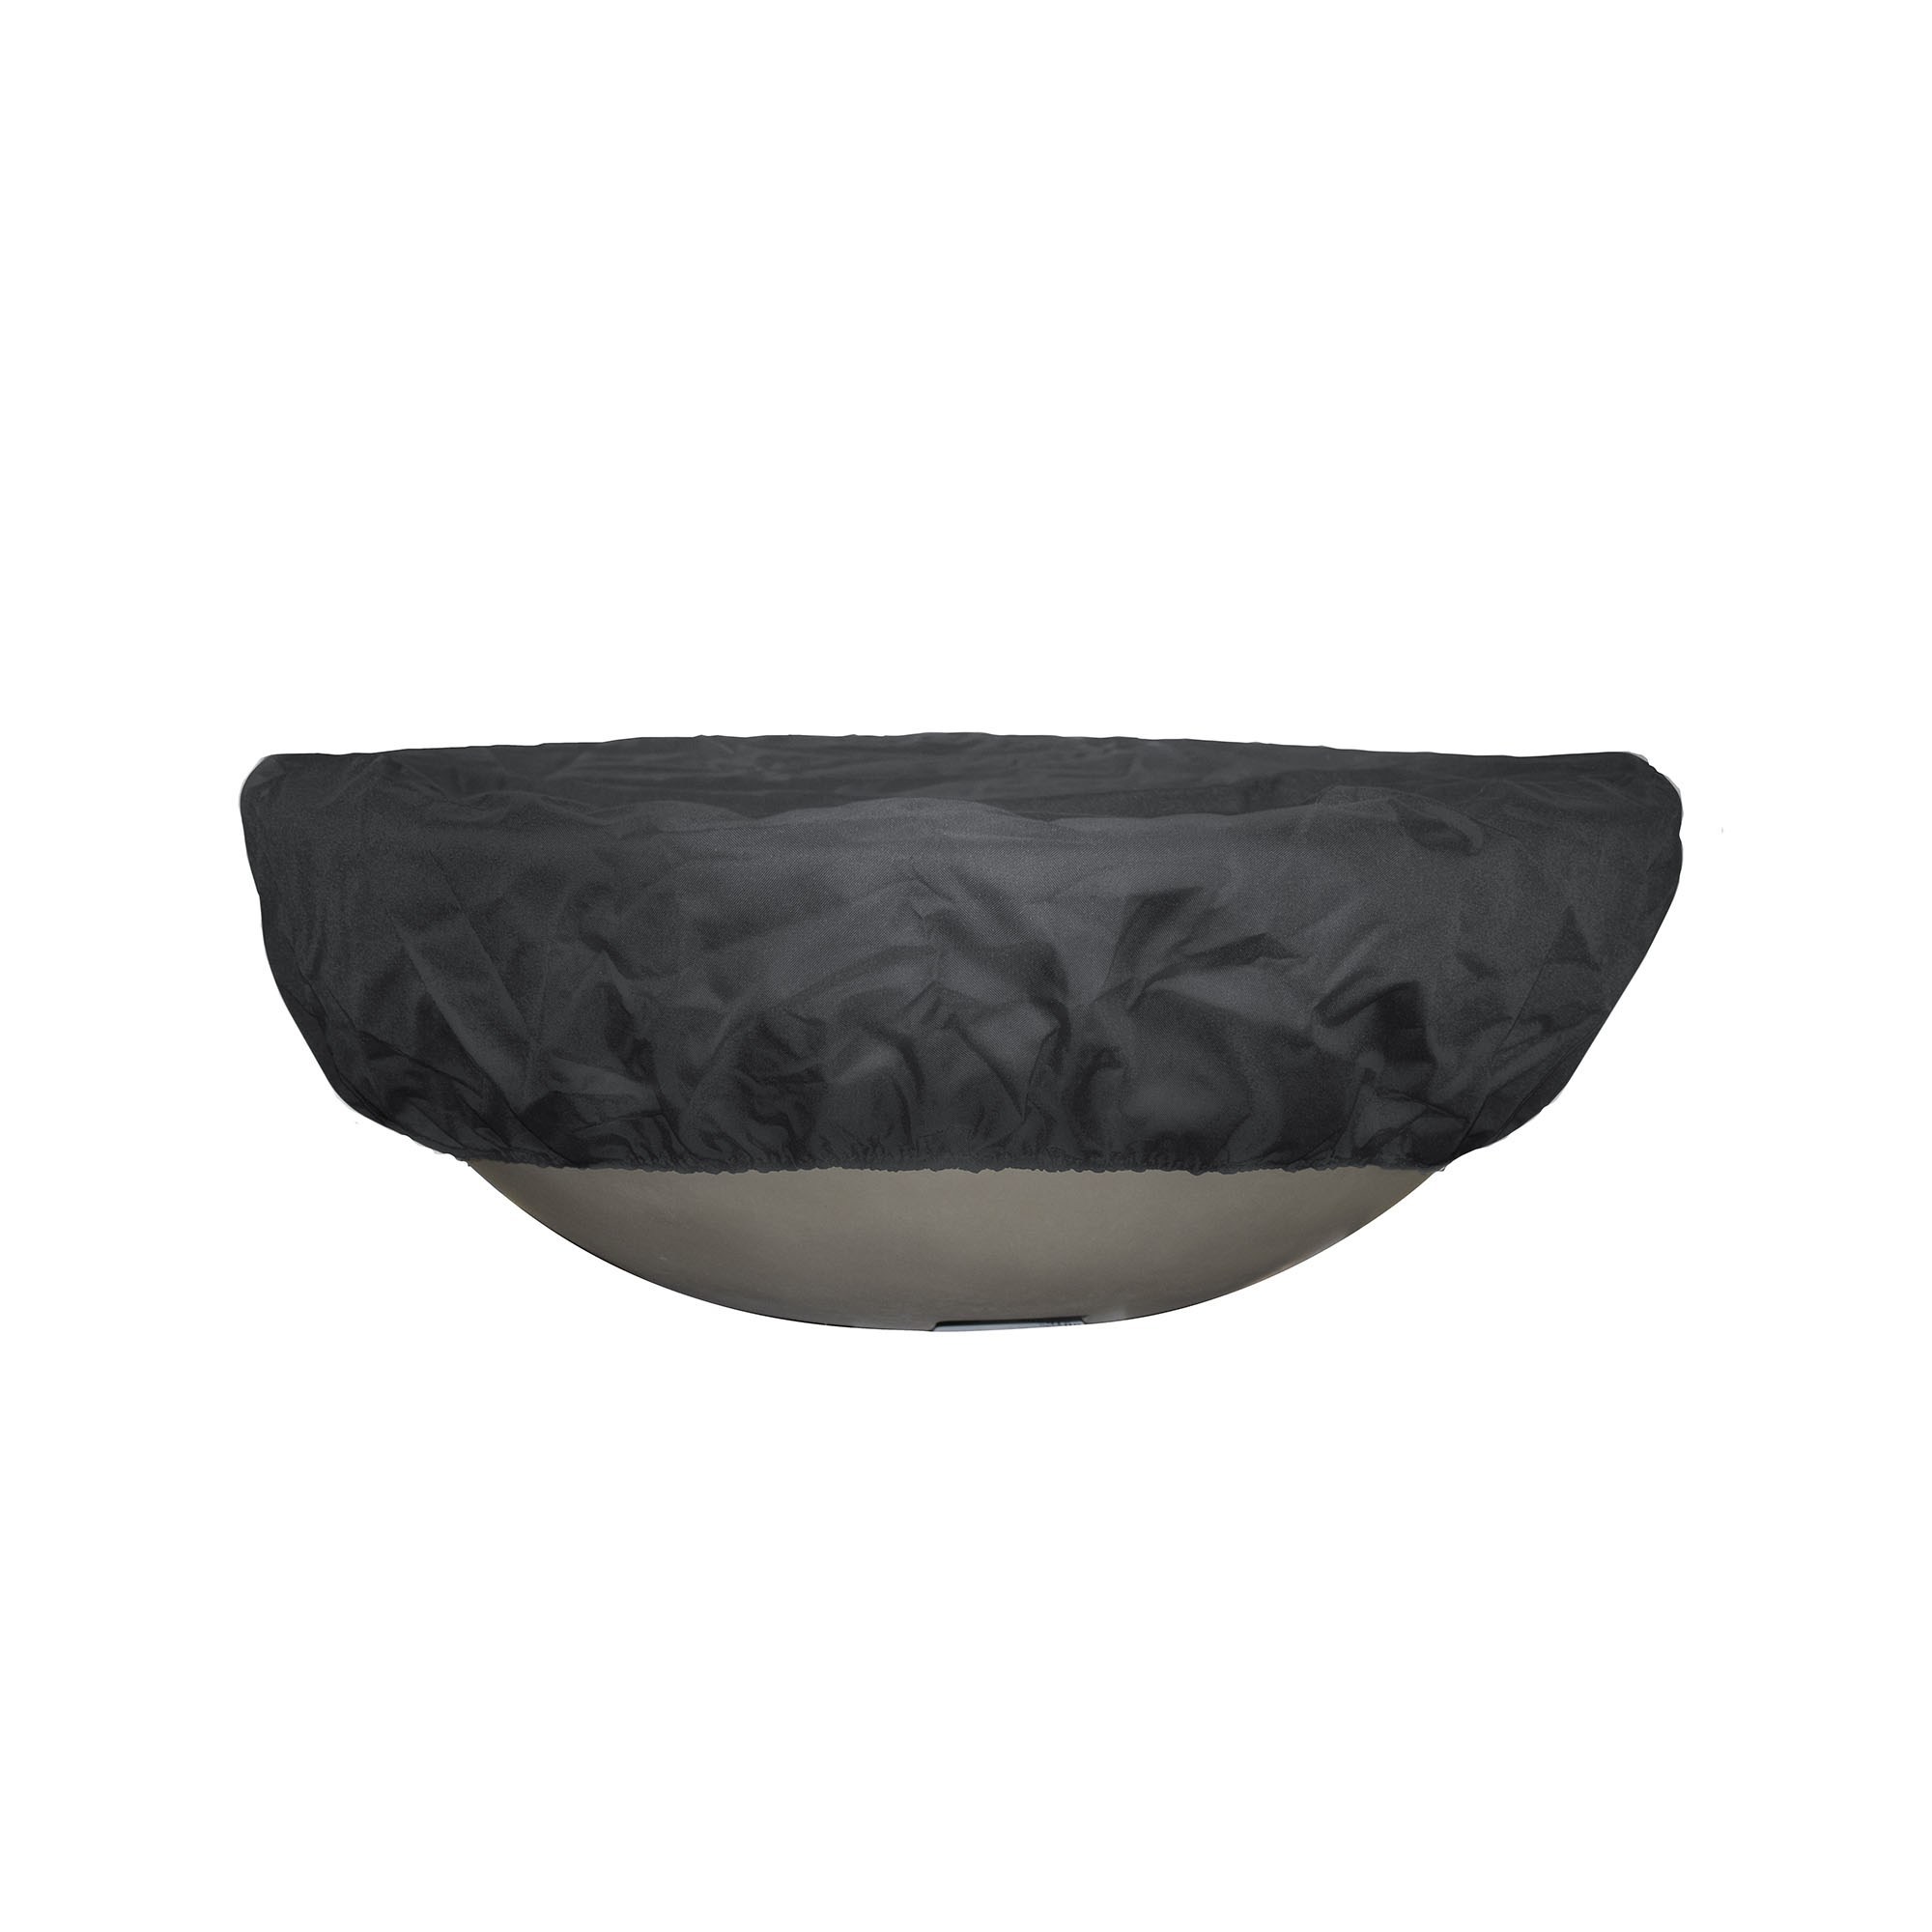 Round Fire Pit And Bowl Canvas Cover, 72 Inch Fire Pit Cover